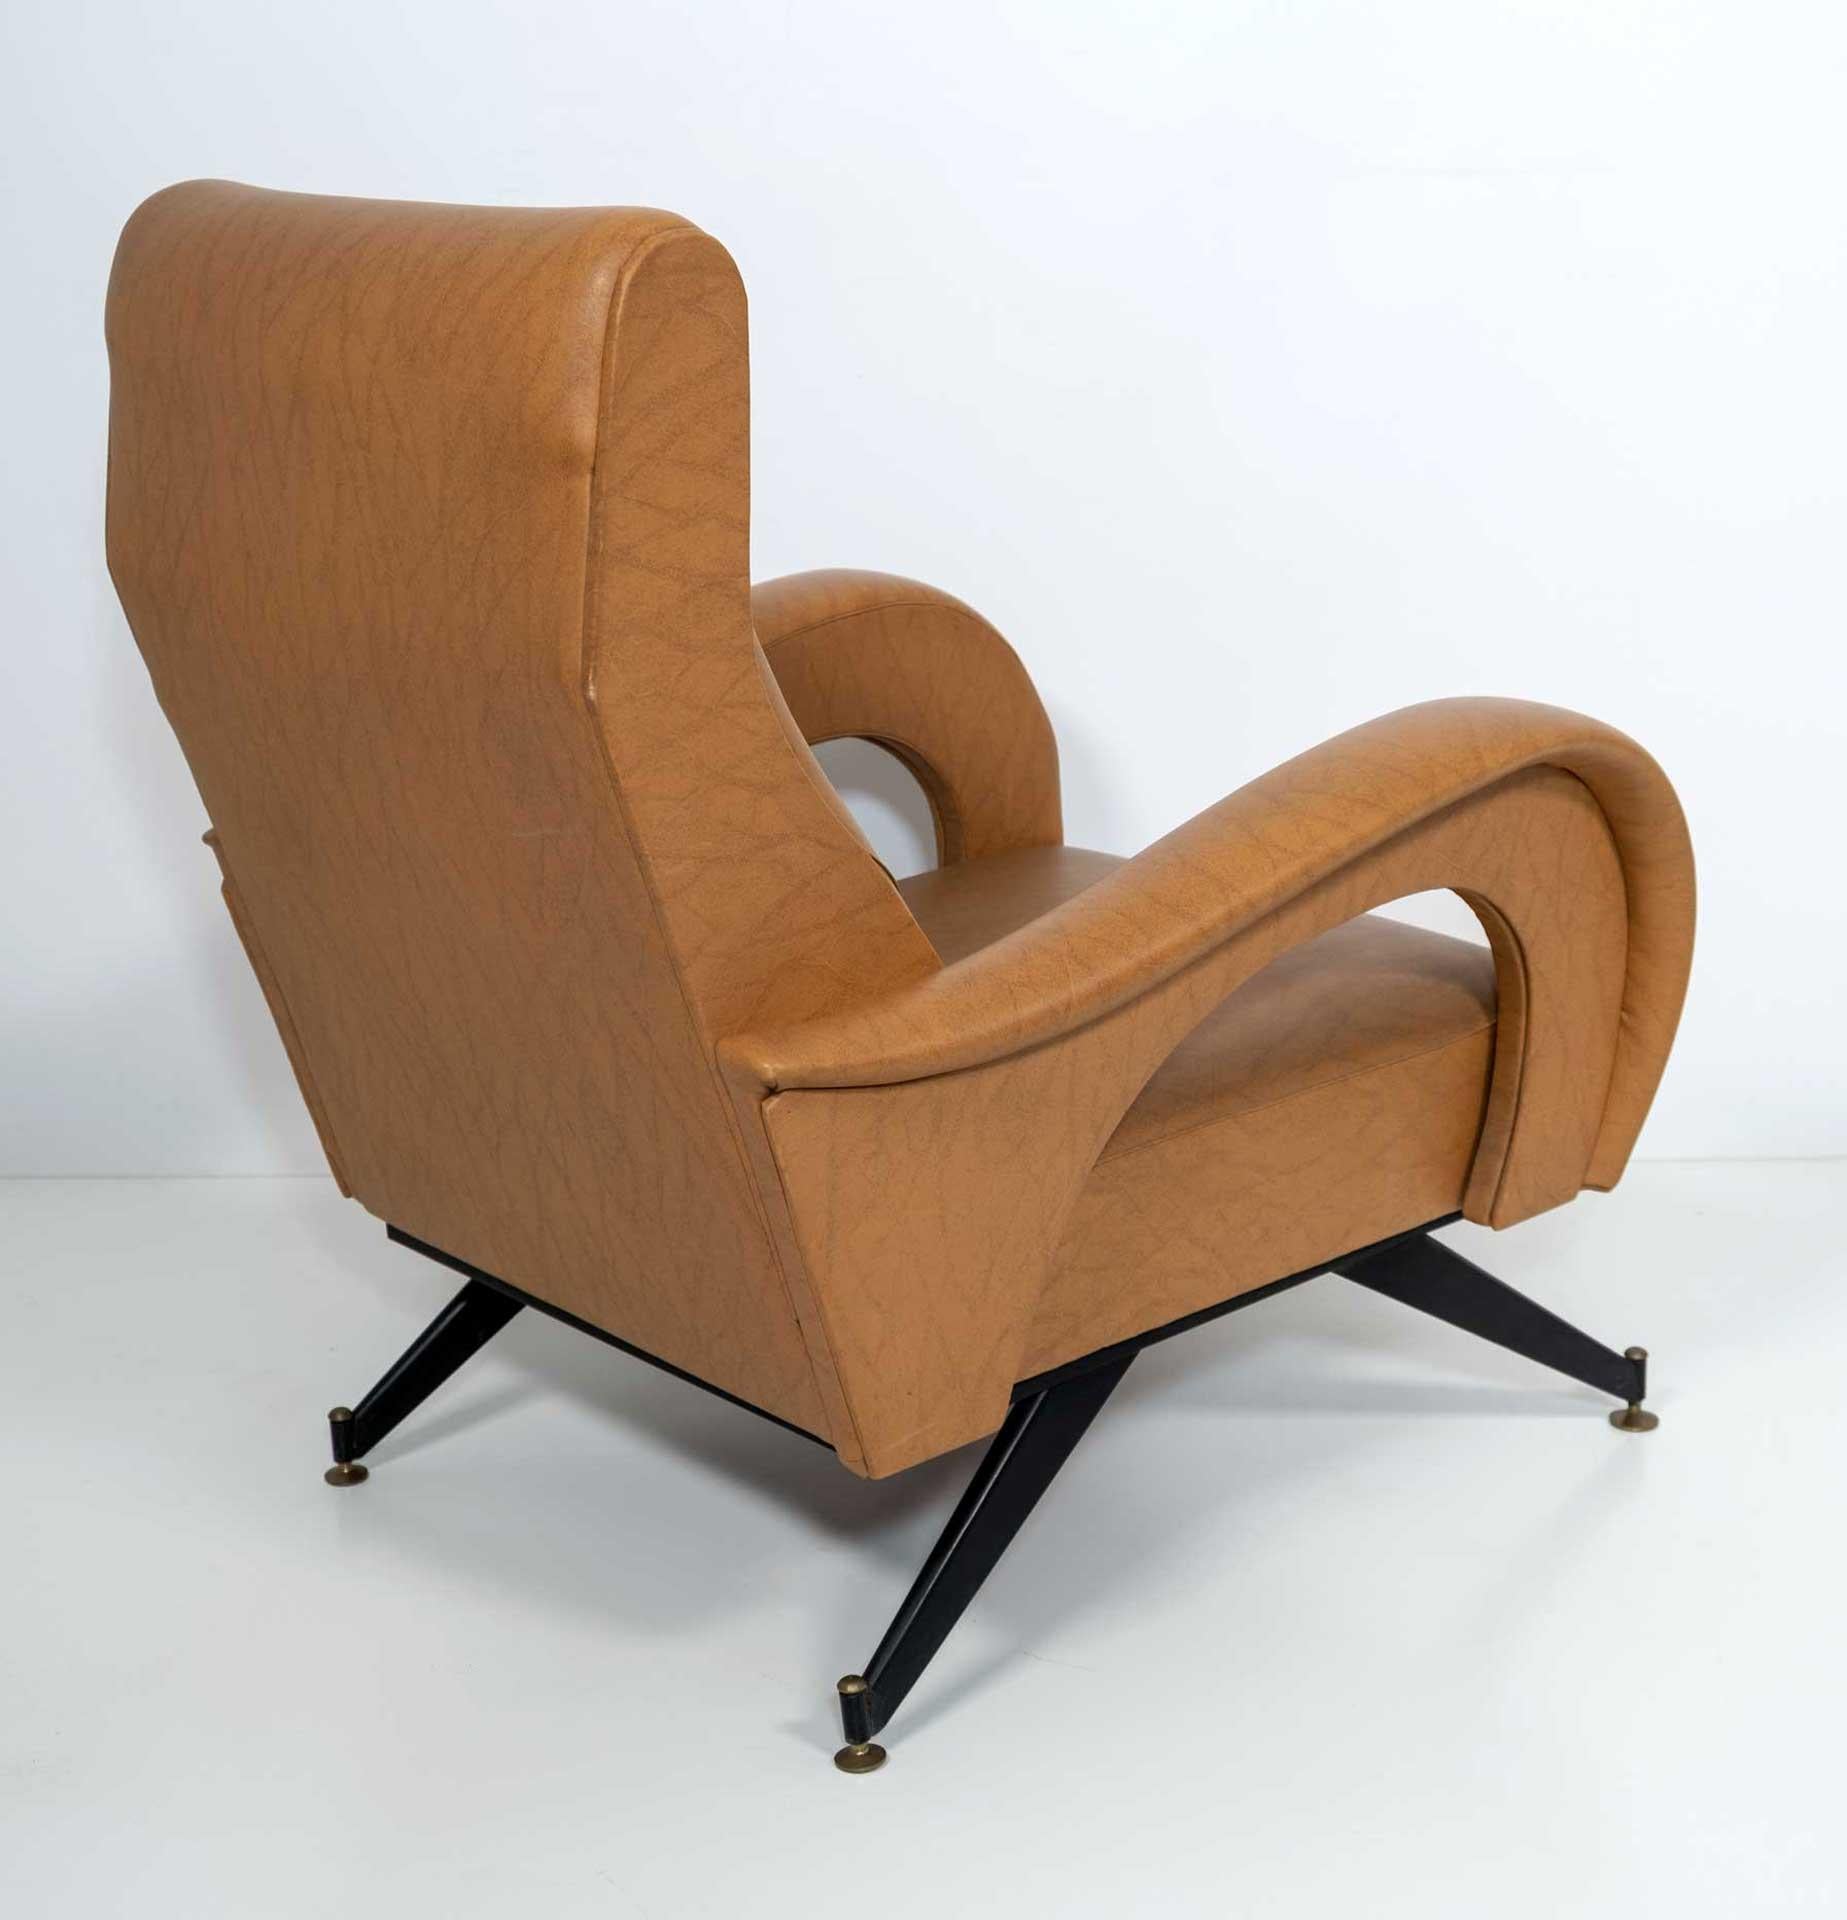 Marco Zanuso Style Mid-Century Modern Italian Leather Lounge Chair, 1970s For Sale 2